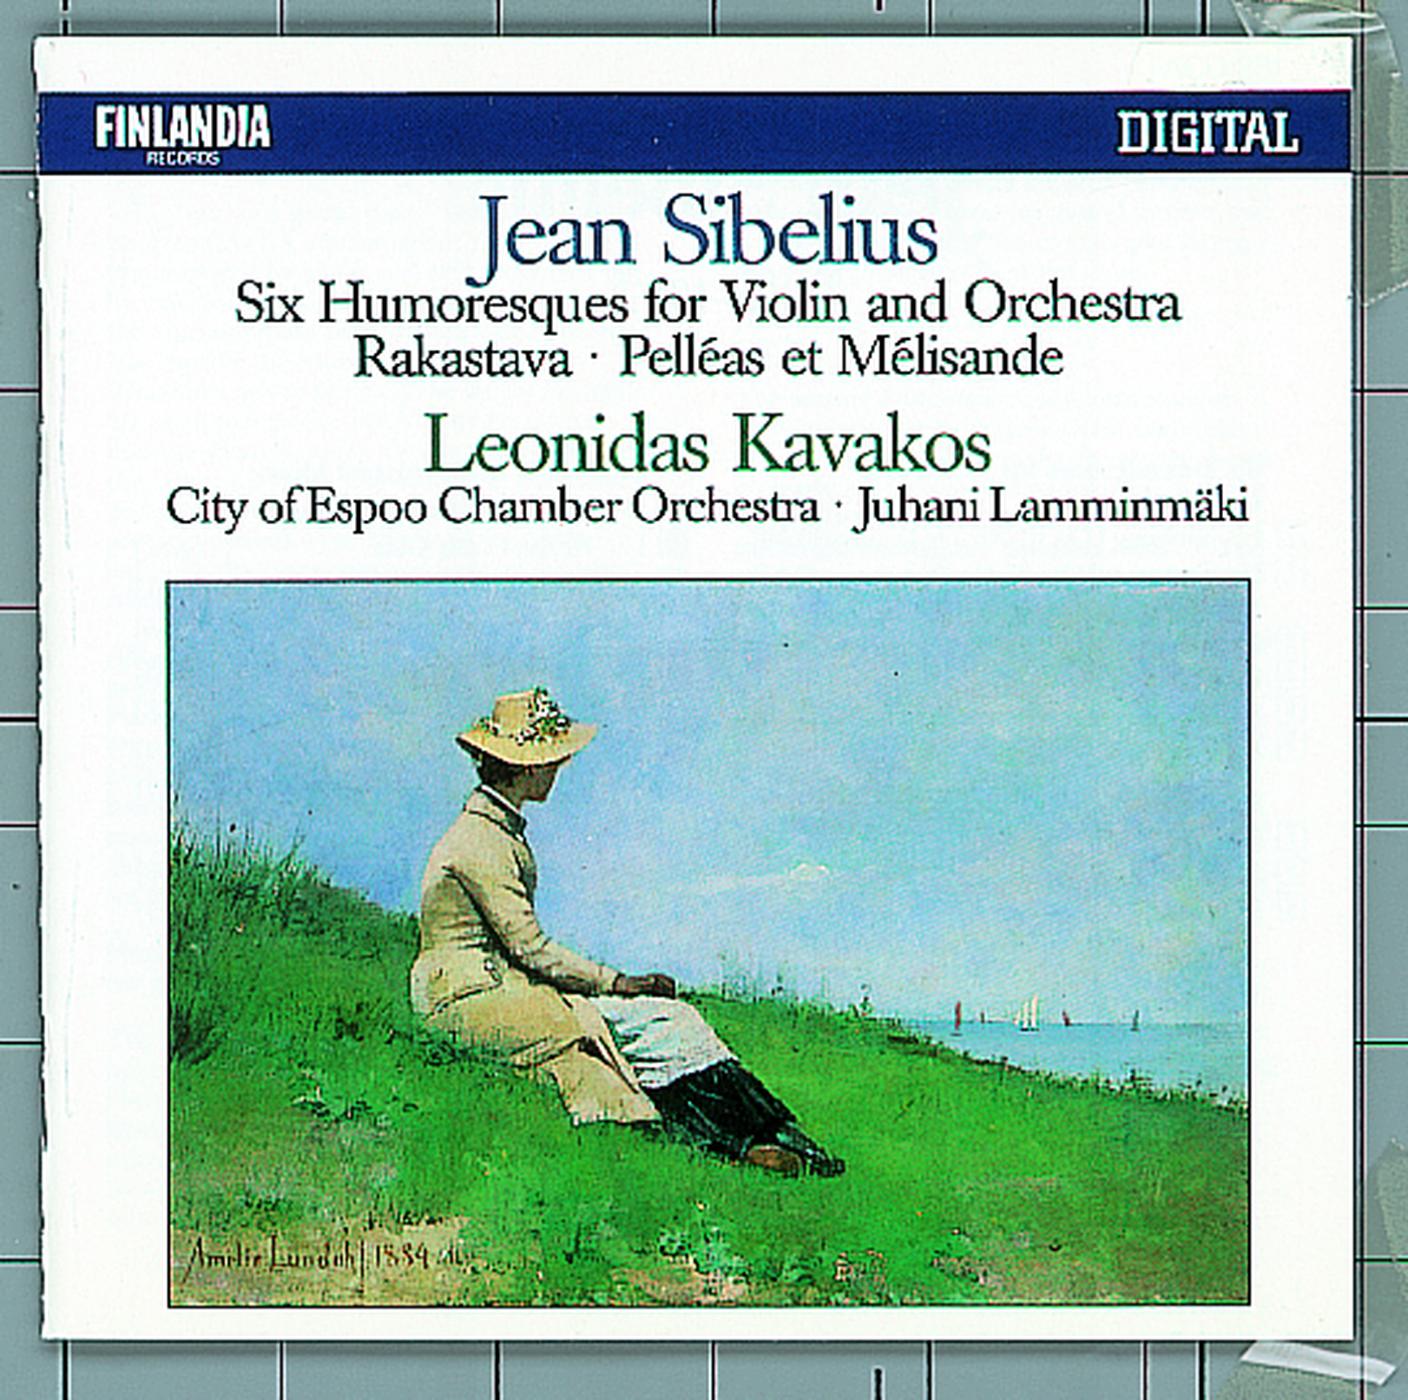 Jean Sibelius : Six Humoresques for Violin and Orchestra, Rakastava, Pelle as Et Me lisande